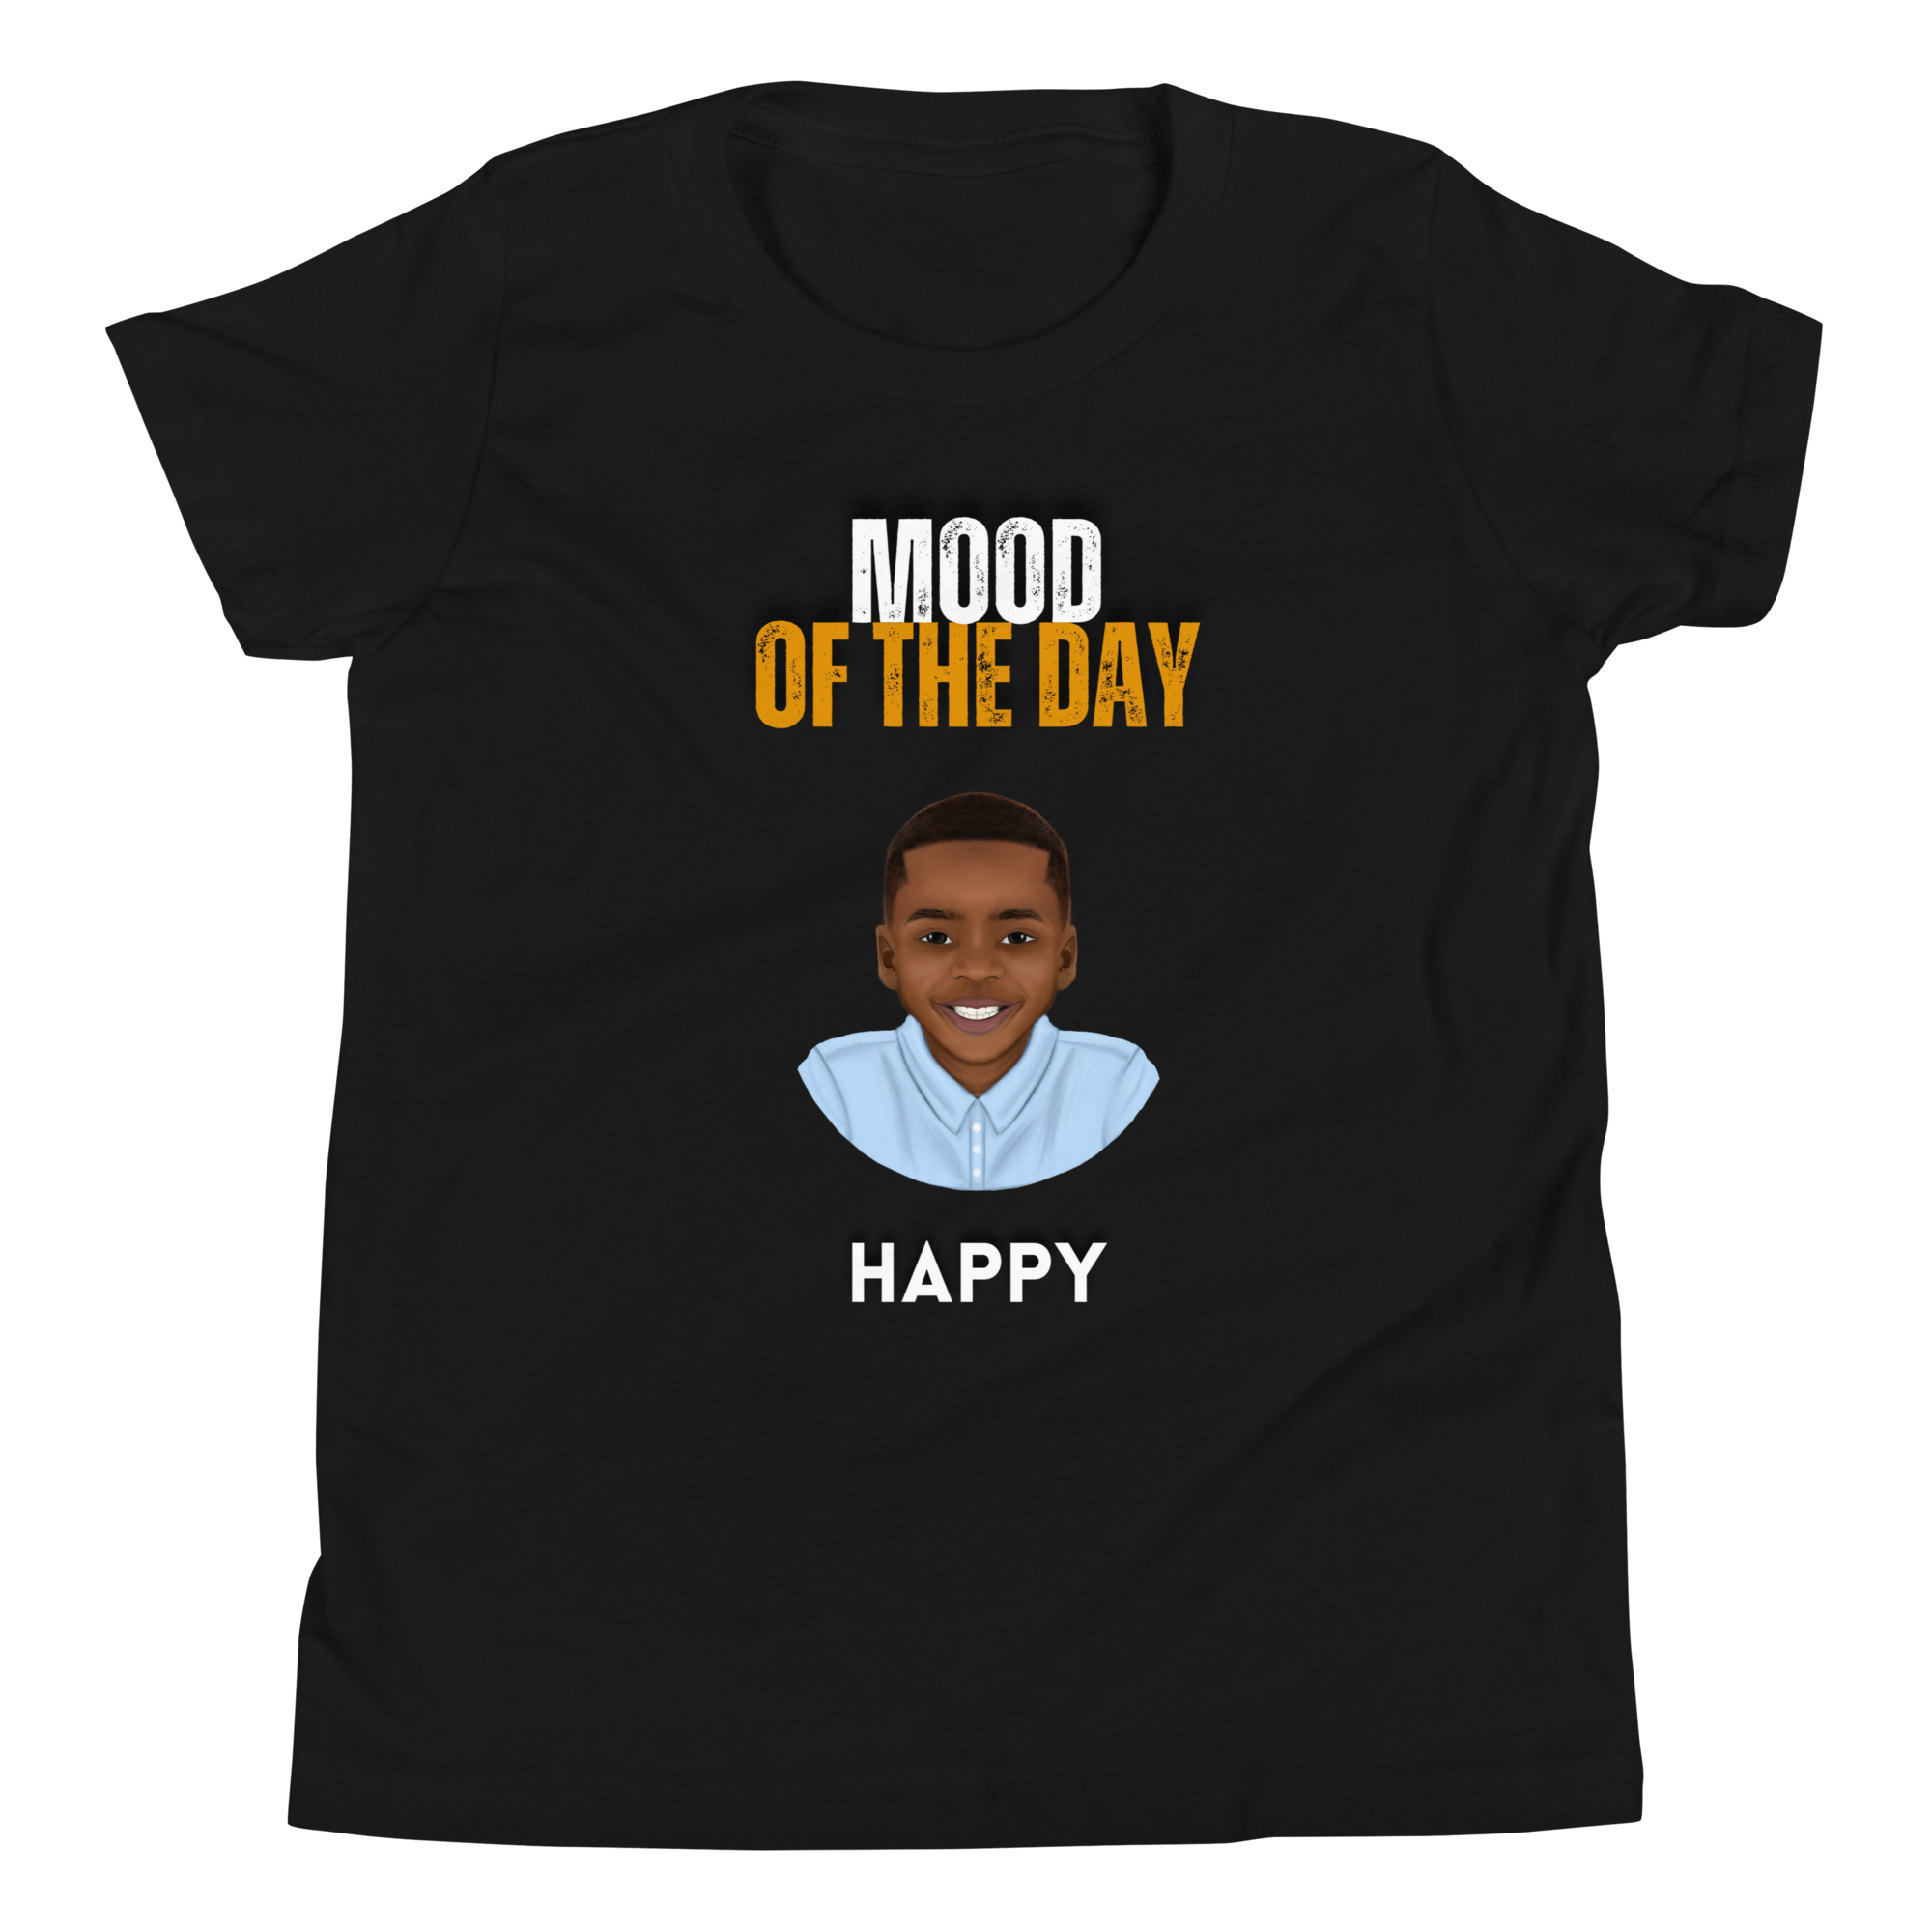 Youth Mood of the Day T-shirt - Happy Boy